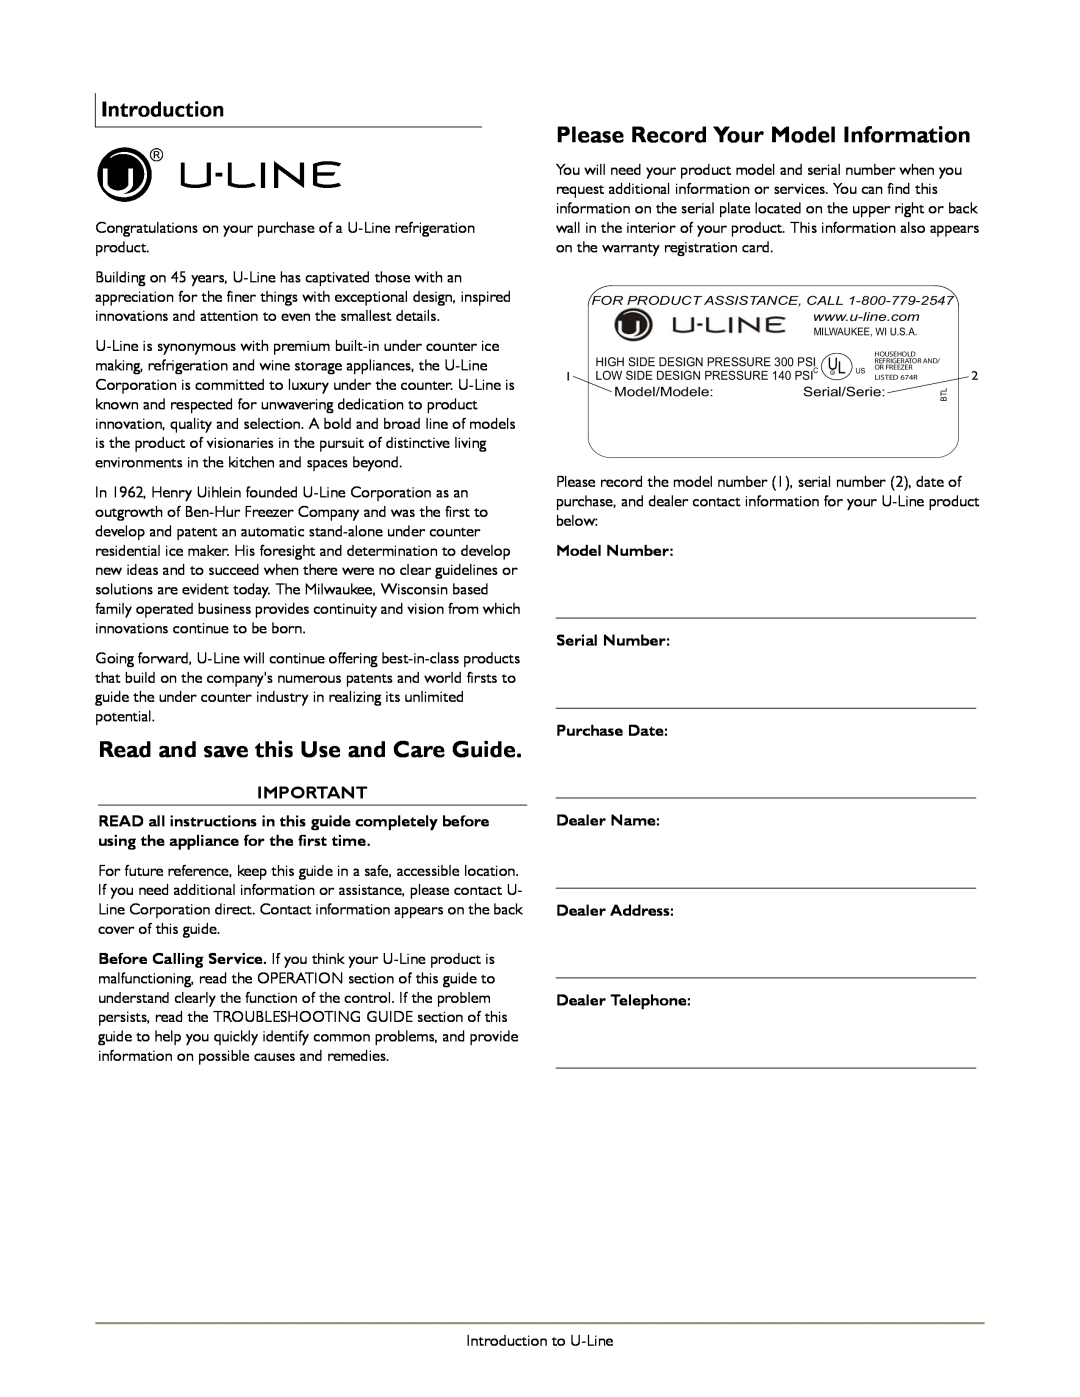 U-Line B12115, B198, ADA151M manual Read and save this Use and Care Guide, Please Record Your Model Information, Introduction 